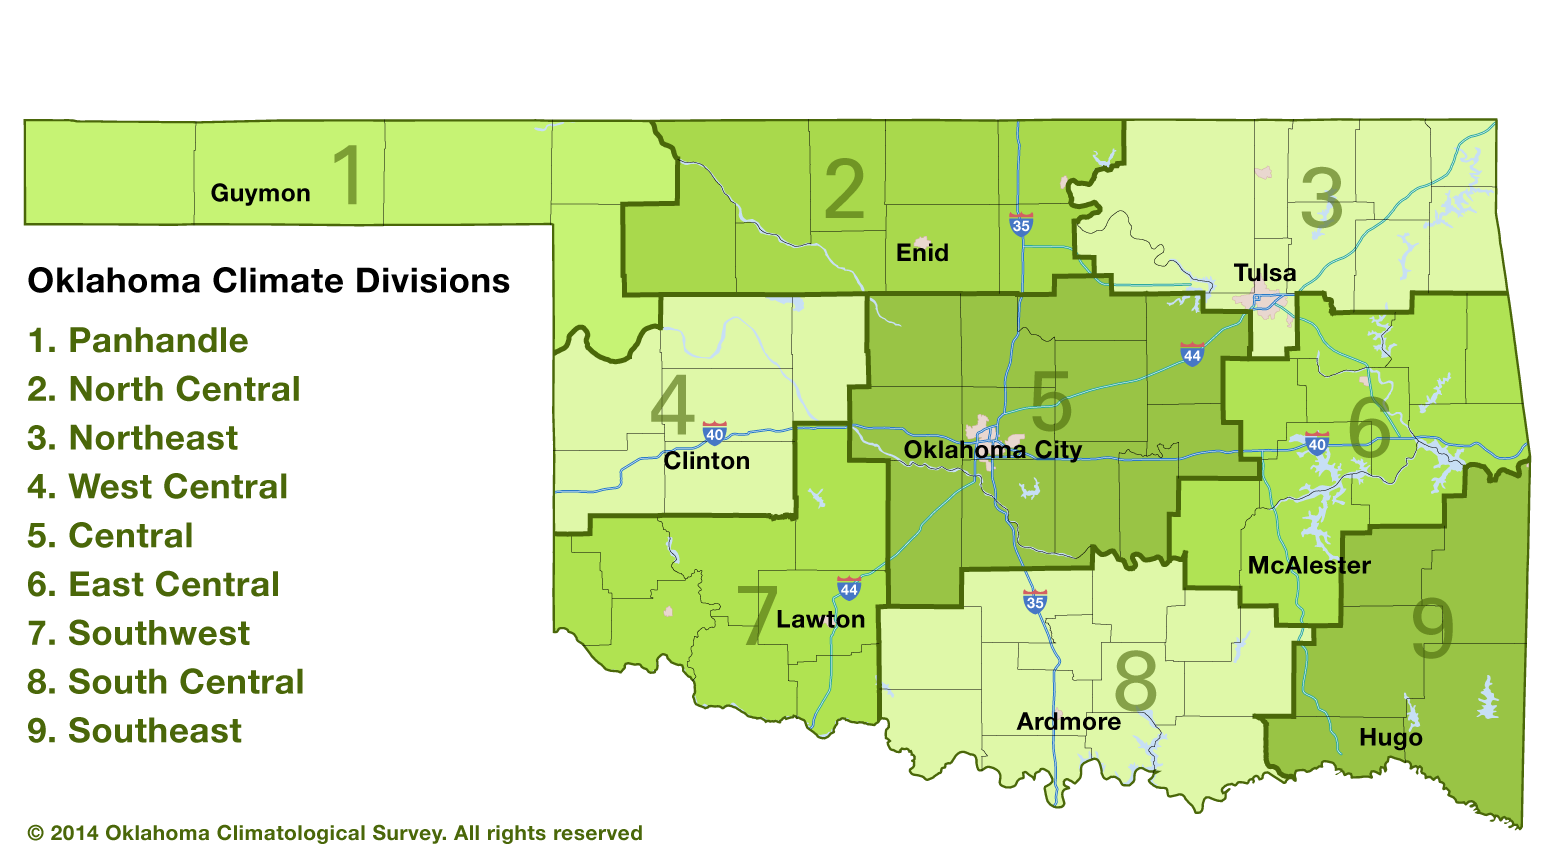 Map of Oklahoma counties with climate divisions displayed. Division 1 is the Panhandle and extreme northwestern Oklahoma, Division 2 is North Central, Division 3 is Northeast, Division 4 is West Central, Division 5 is Central, Division 6 is East Central, Division 7 is Southwest, Division 8 is South Central, and Division 9 is Southeast. Labels are placed on the map for Guymon in Division 1, Enid in Division 2, Tulsa in Division 3, Clinton in Division 4, Oklahoma City in Division 5, McAlester in Division 6, Lawton in Division 7, Ardmore in Division 8, and Hugo in Division 9.